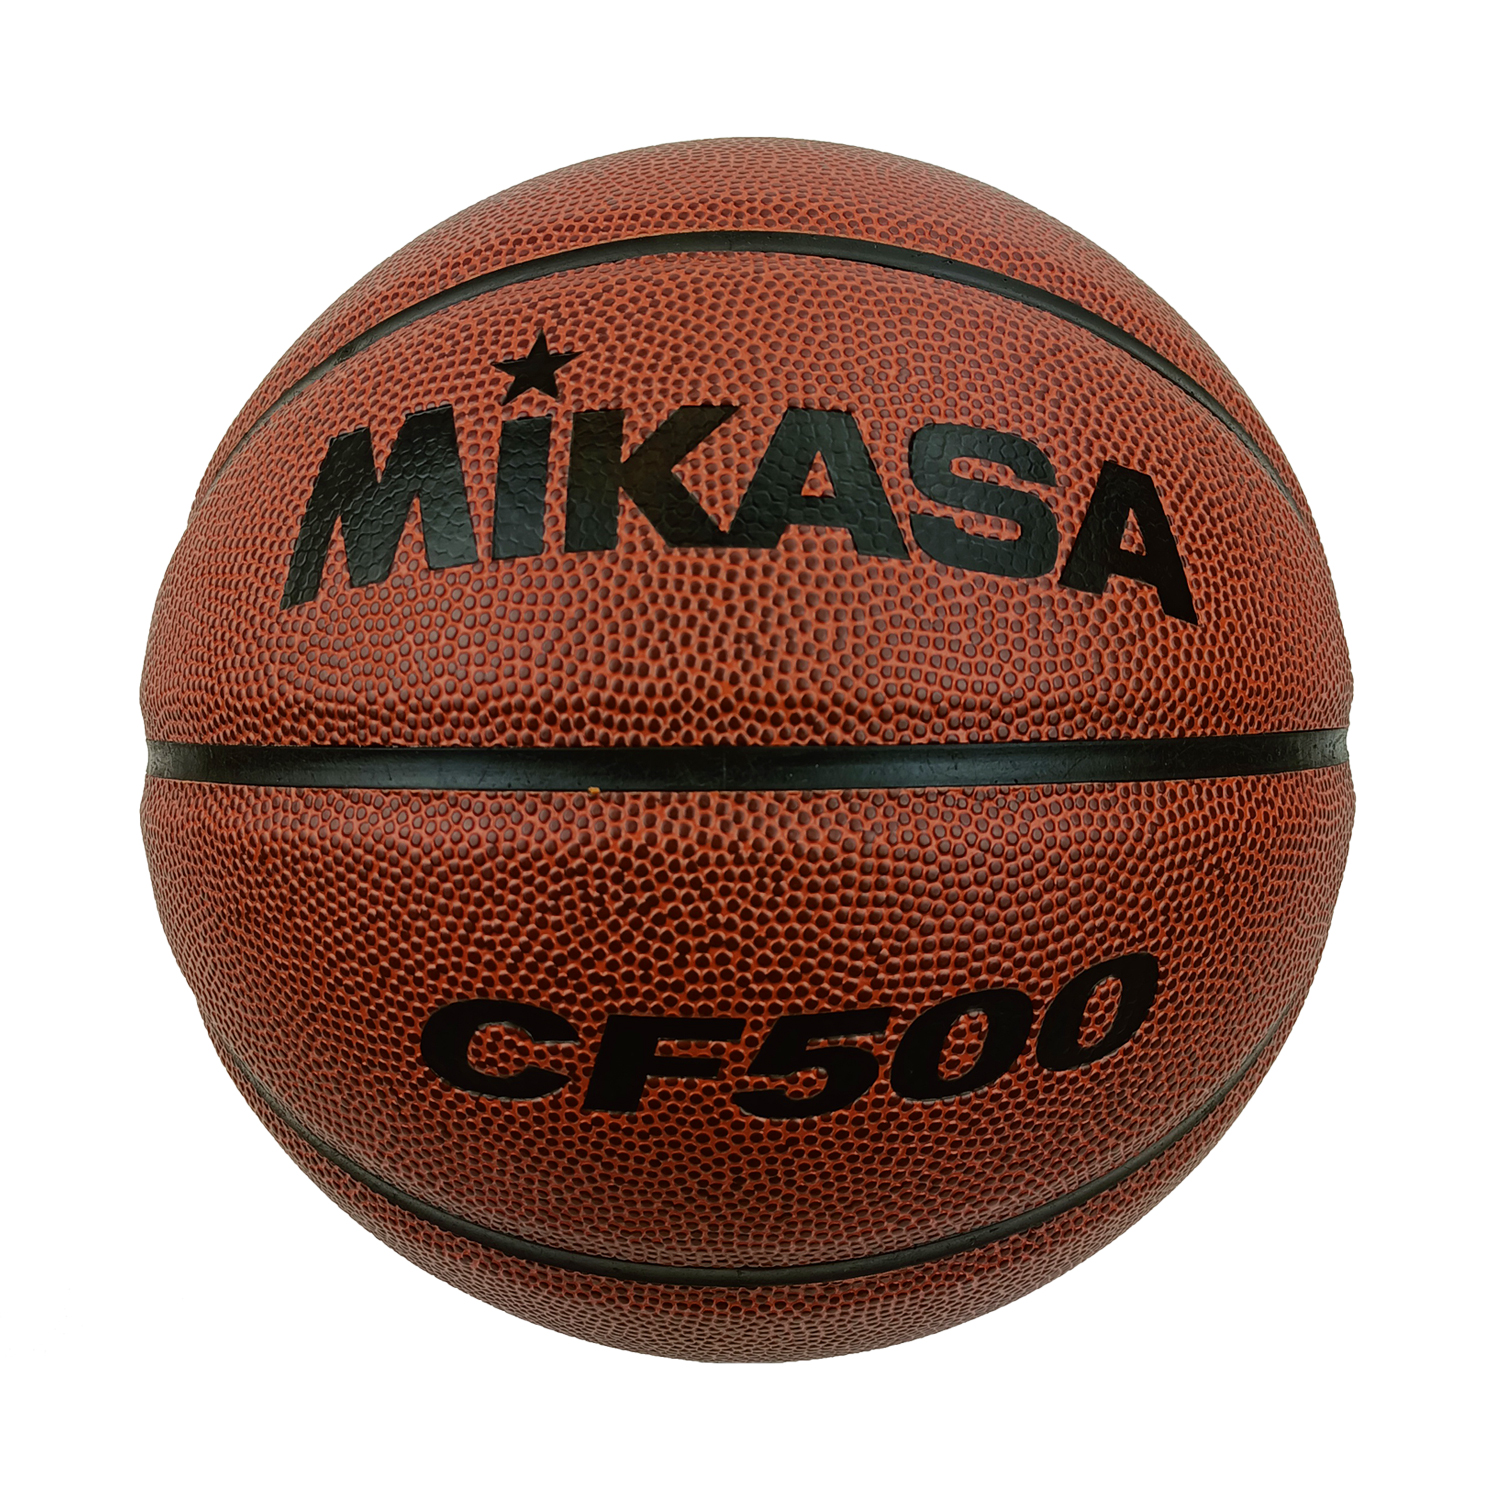 MIKASA CF500 BASKETBALL HIGH GRADE SYNTHETIC LEATHER SIZE 5, , large image number null